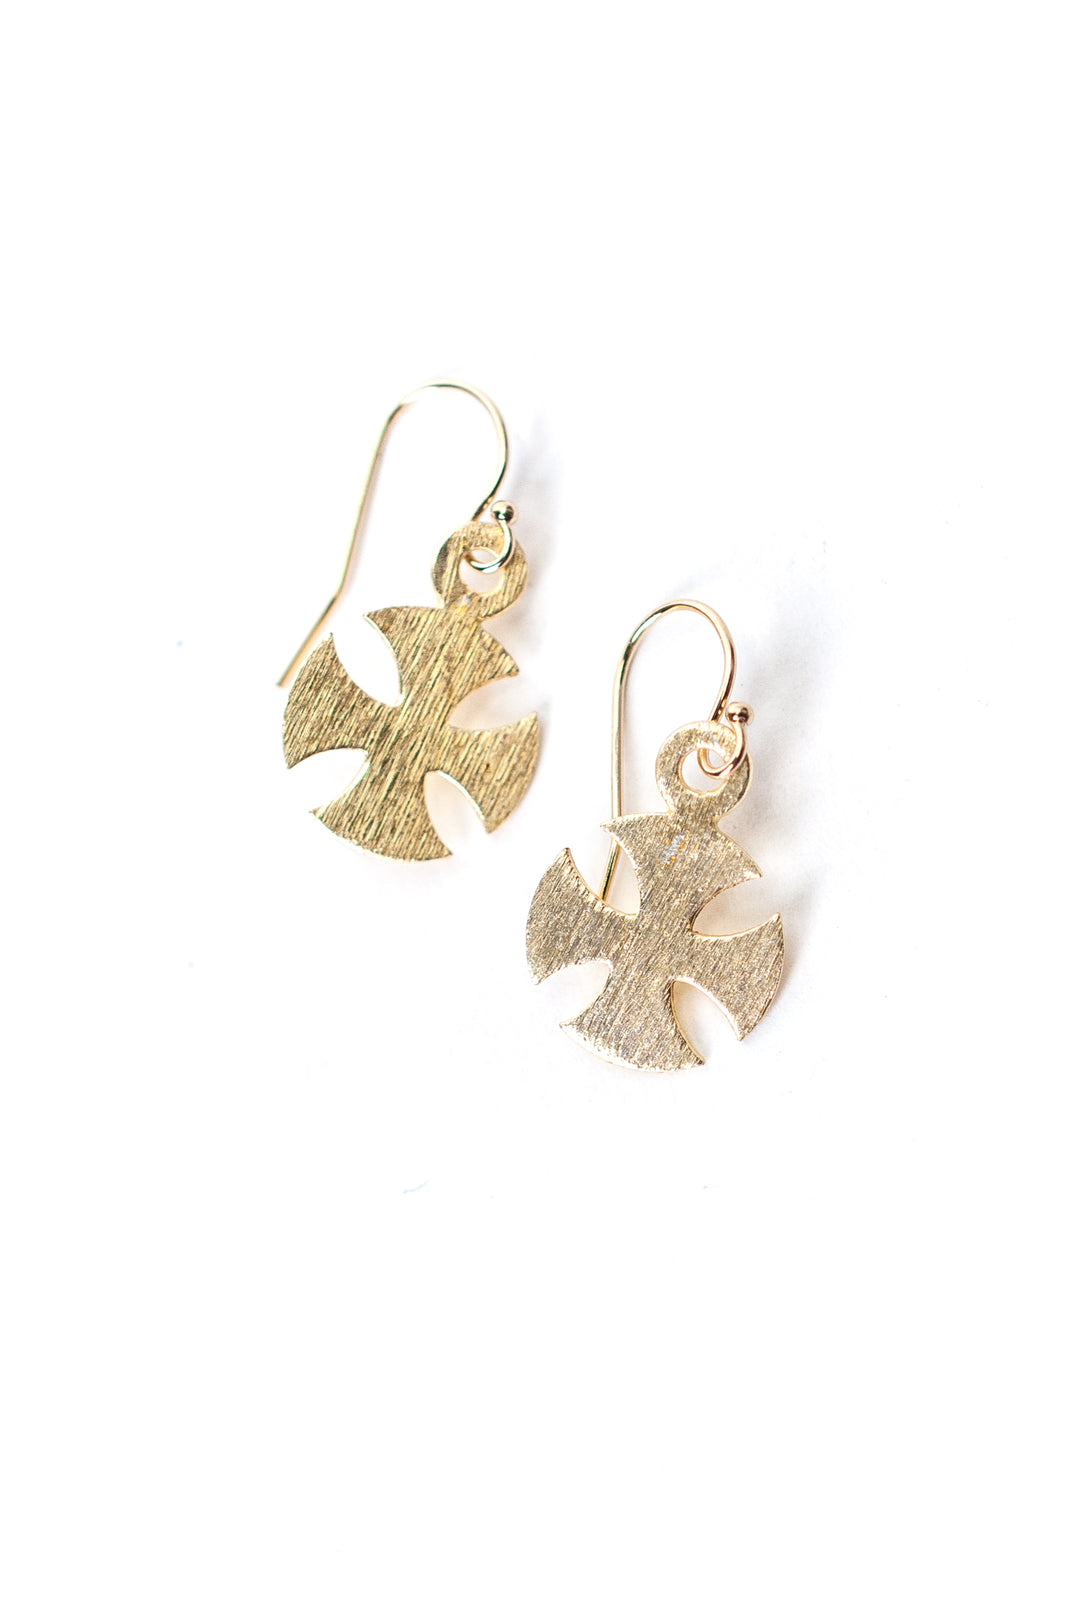 Brushed Gold Norse Cross Earrings